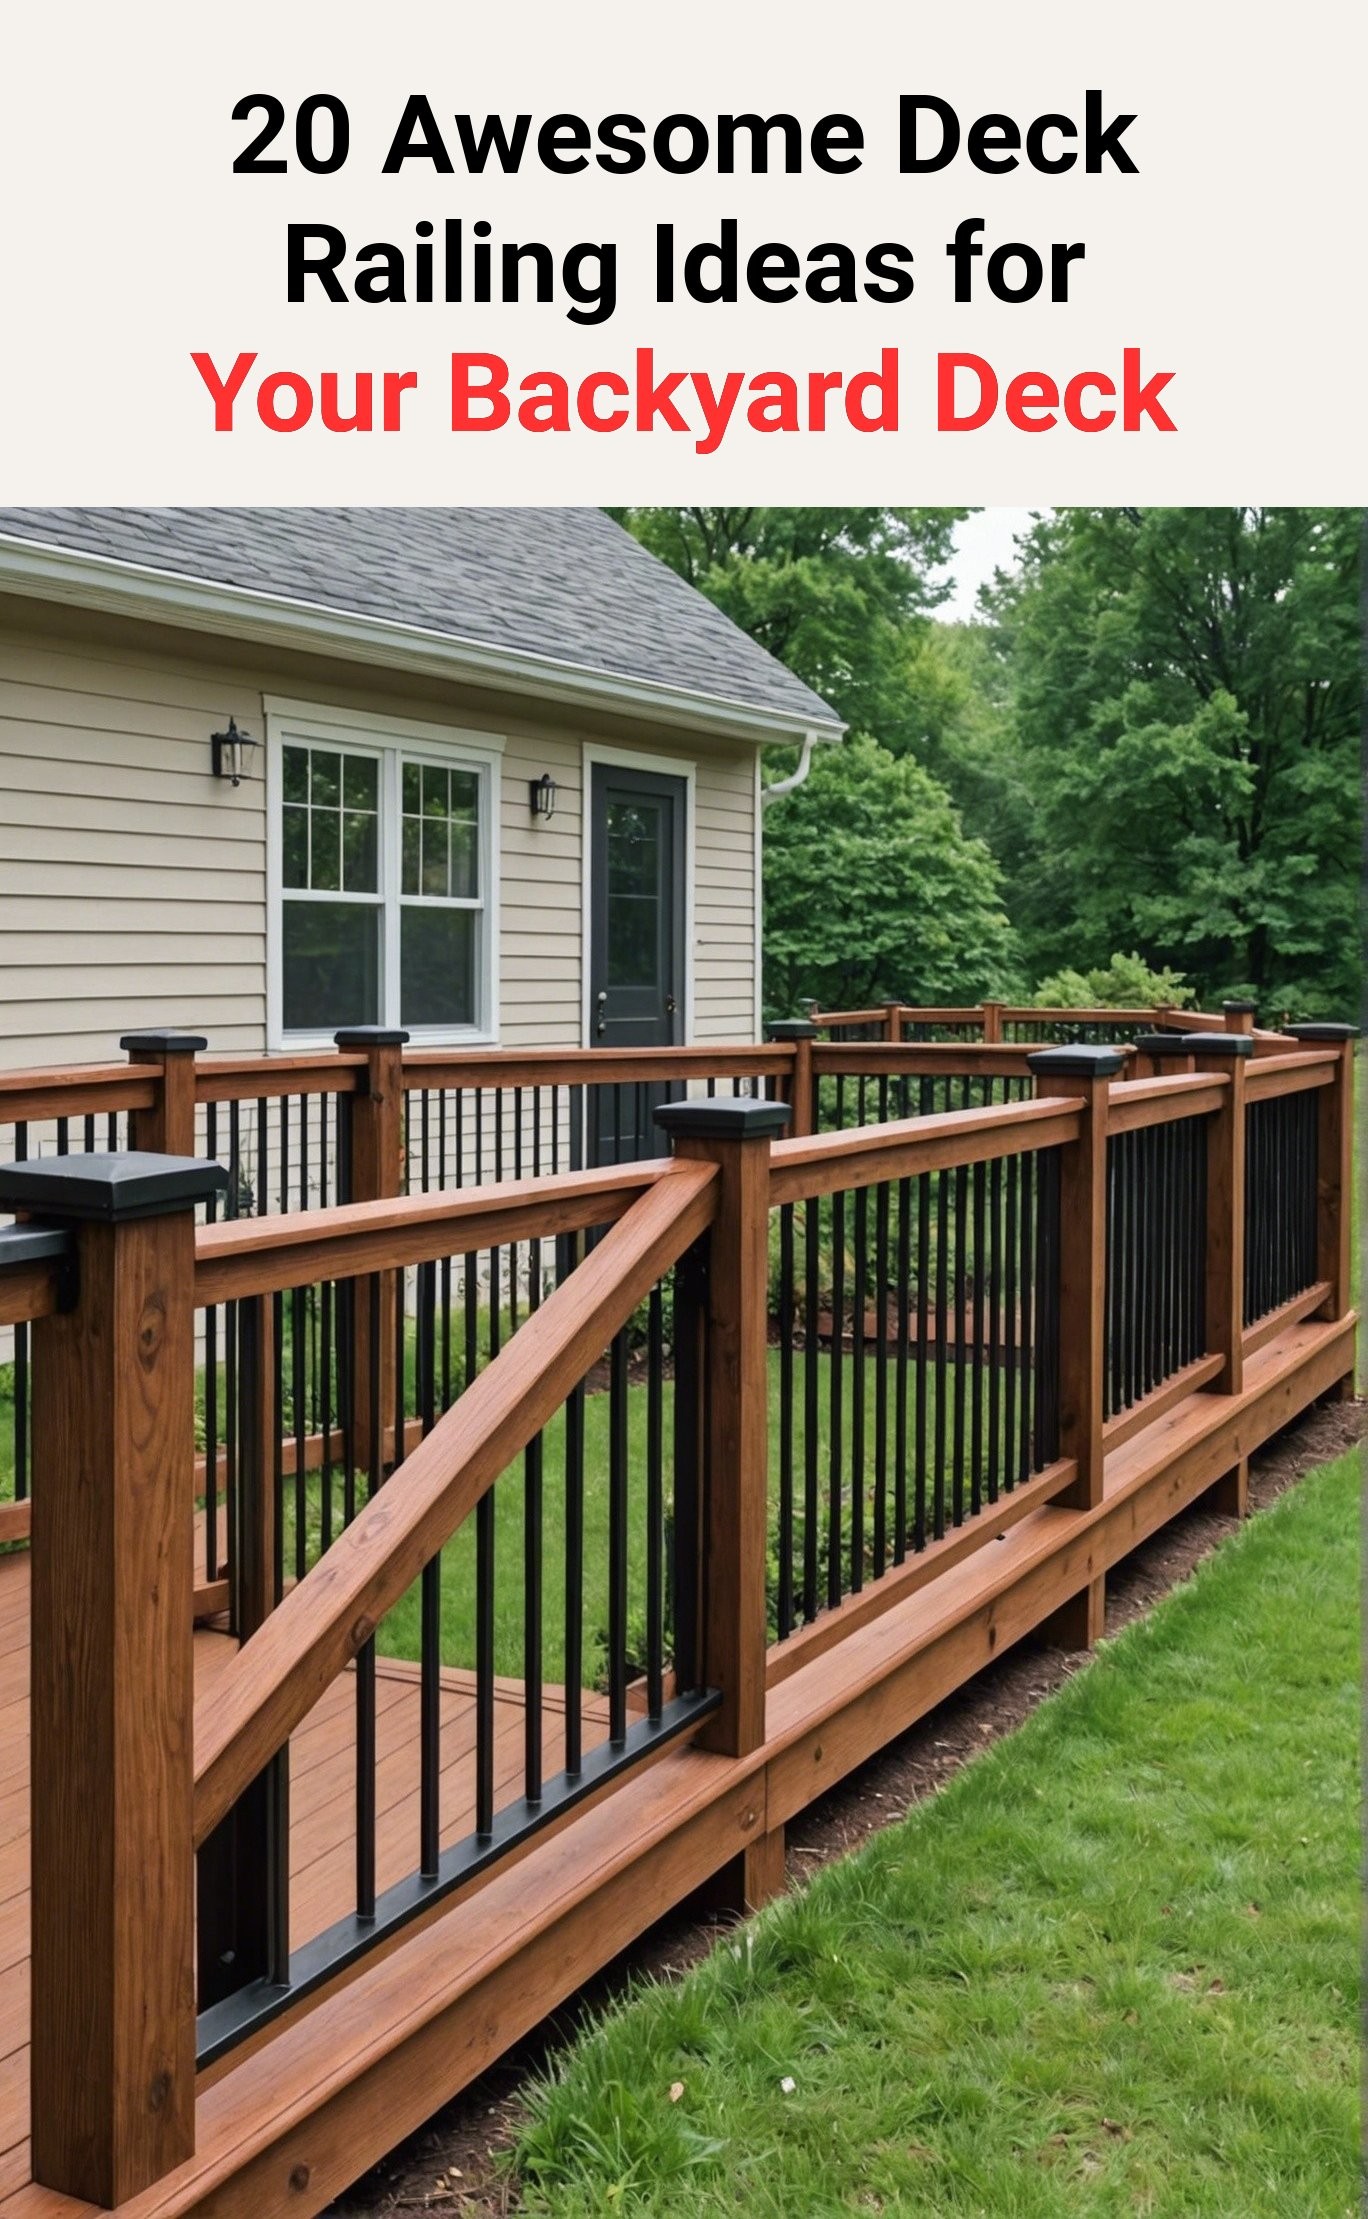 20 Awesome Deck Railing Ideas for Your Backyard Deck